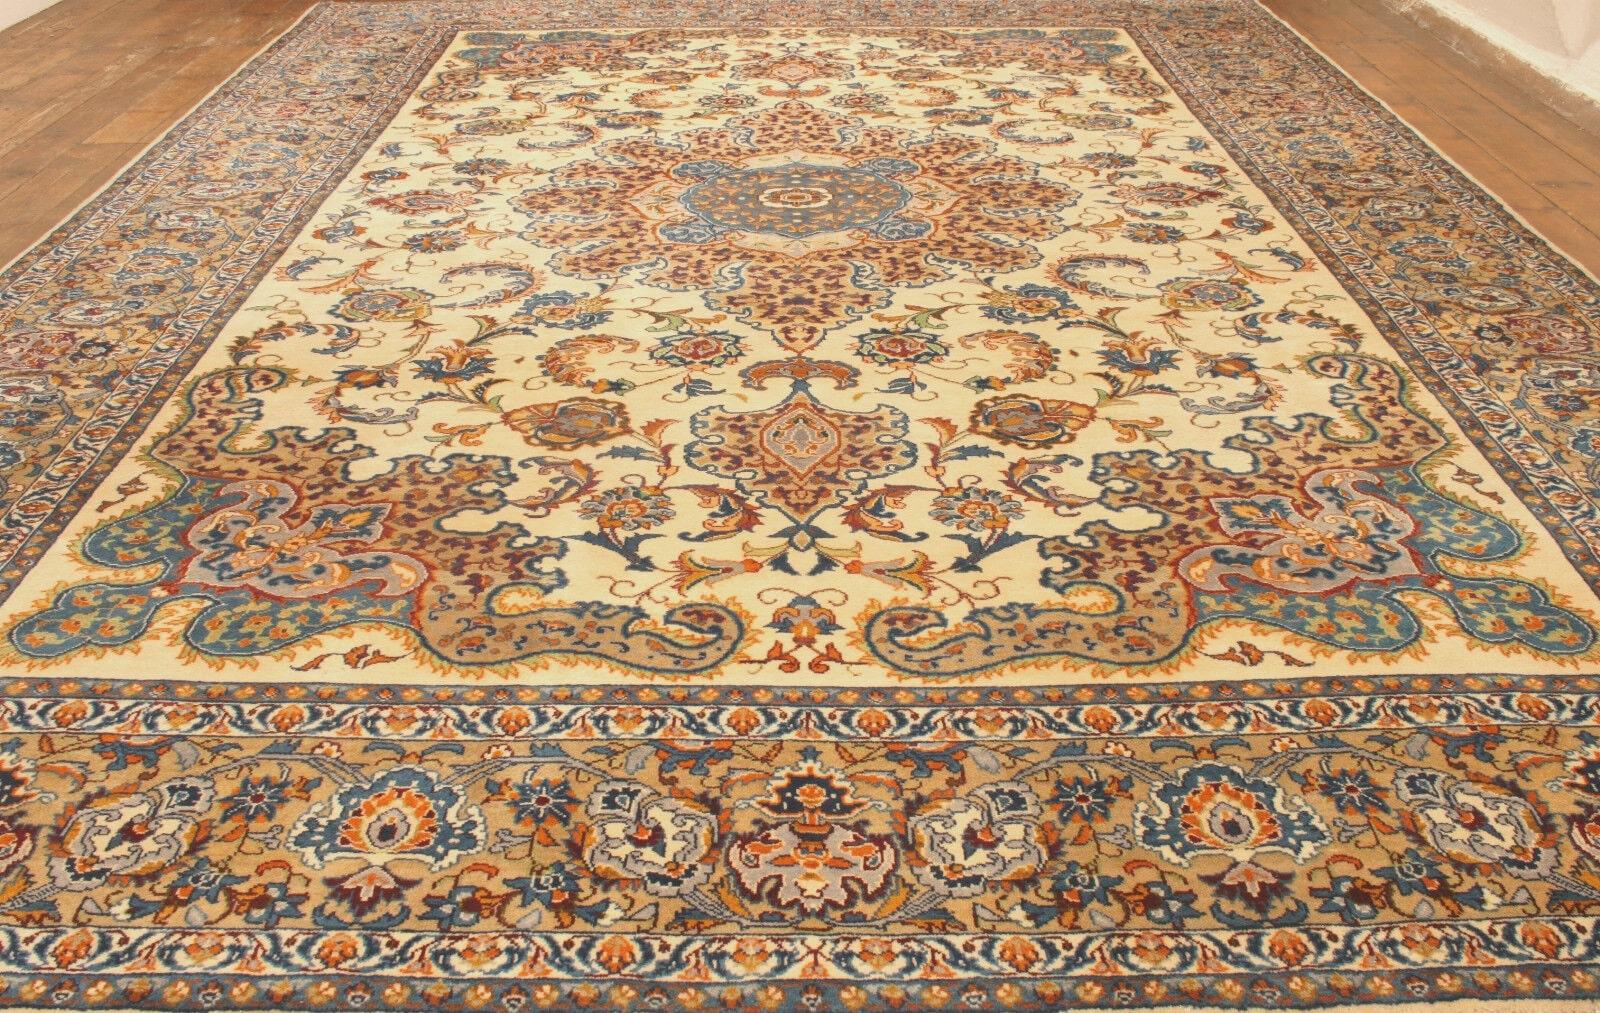 Late 20th Century Handmade Vintage Persian Style Isfahan Rug 9.9' x 13.7', 1990s - 1T45 For Sale